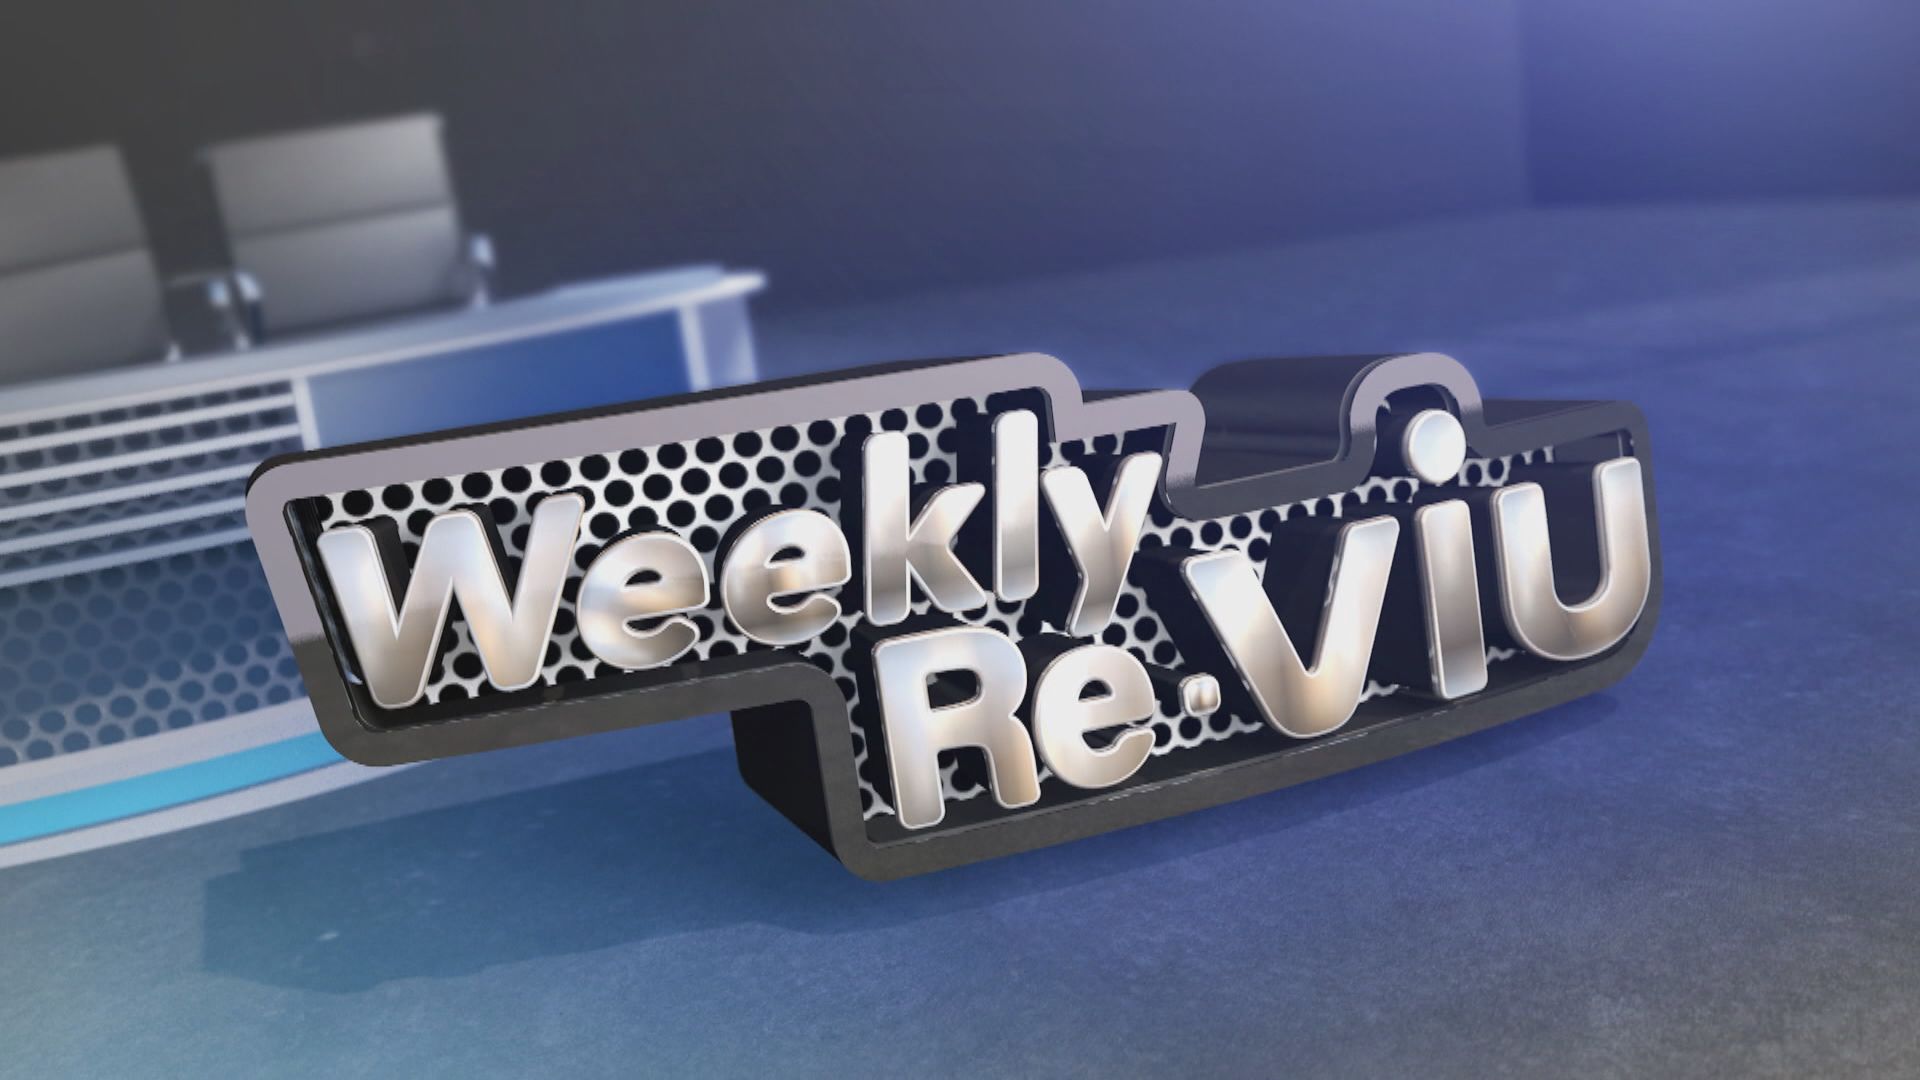 Weekly ReViu | Part Two - Story Roundup (17.9.2022)